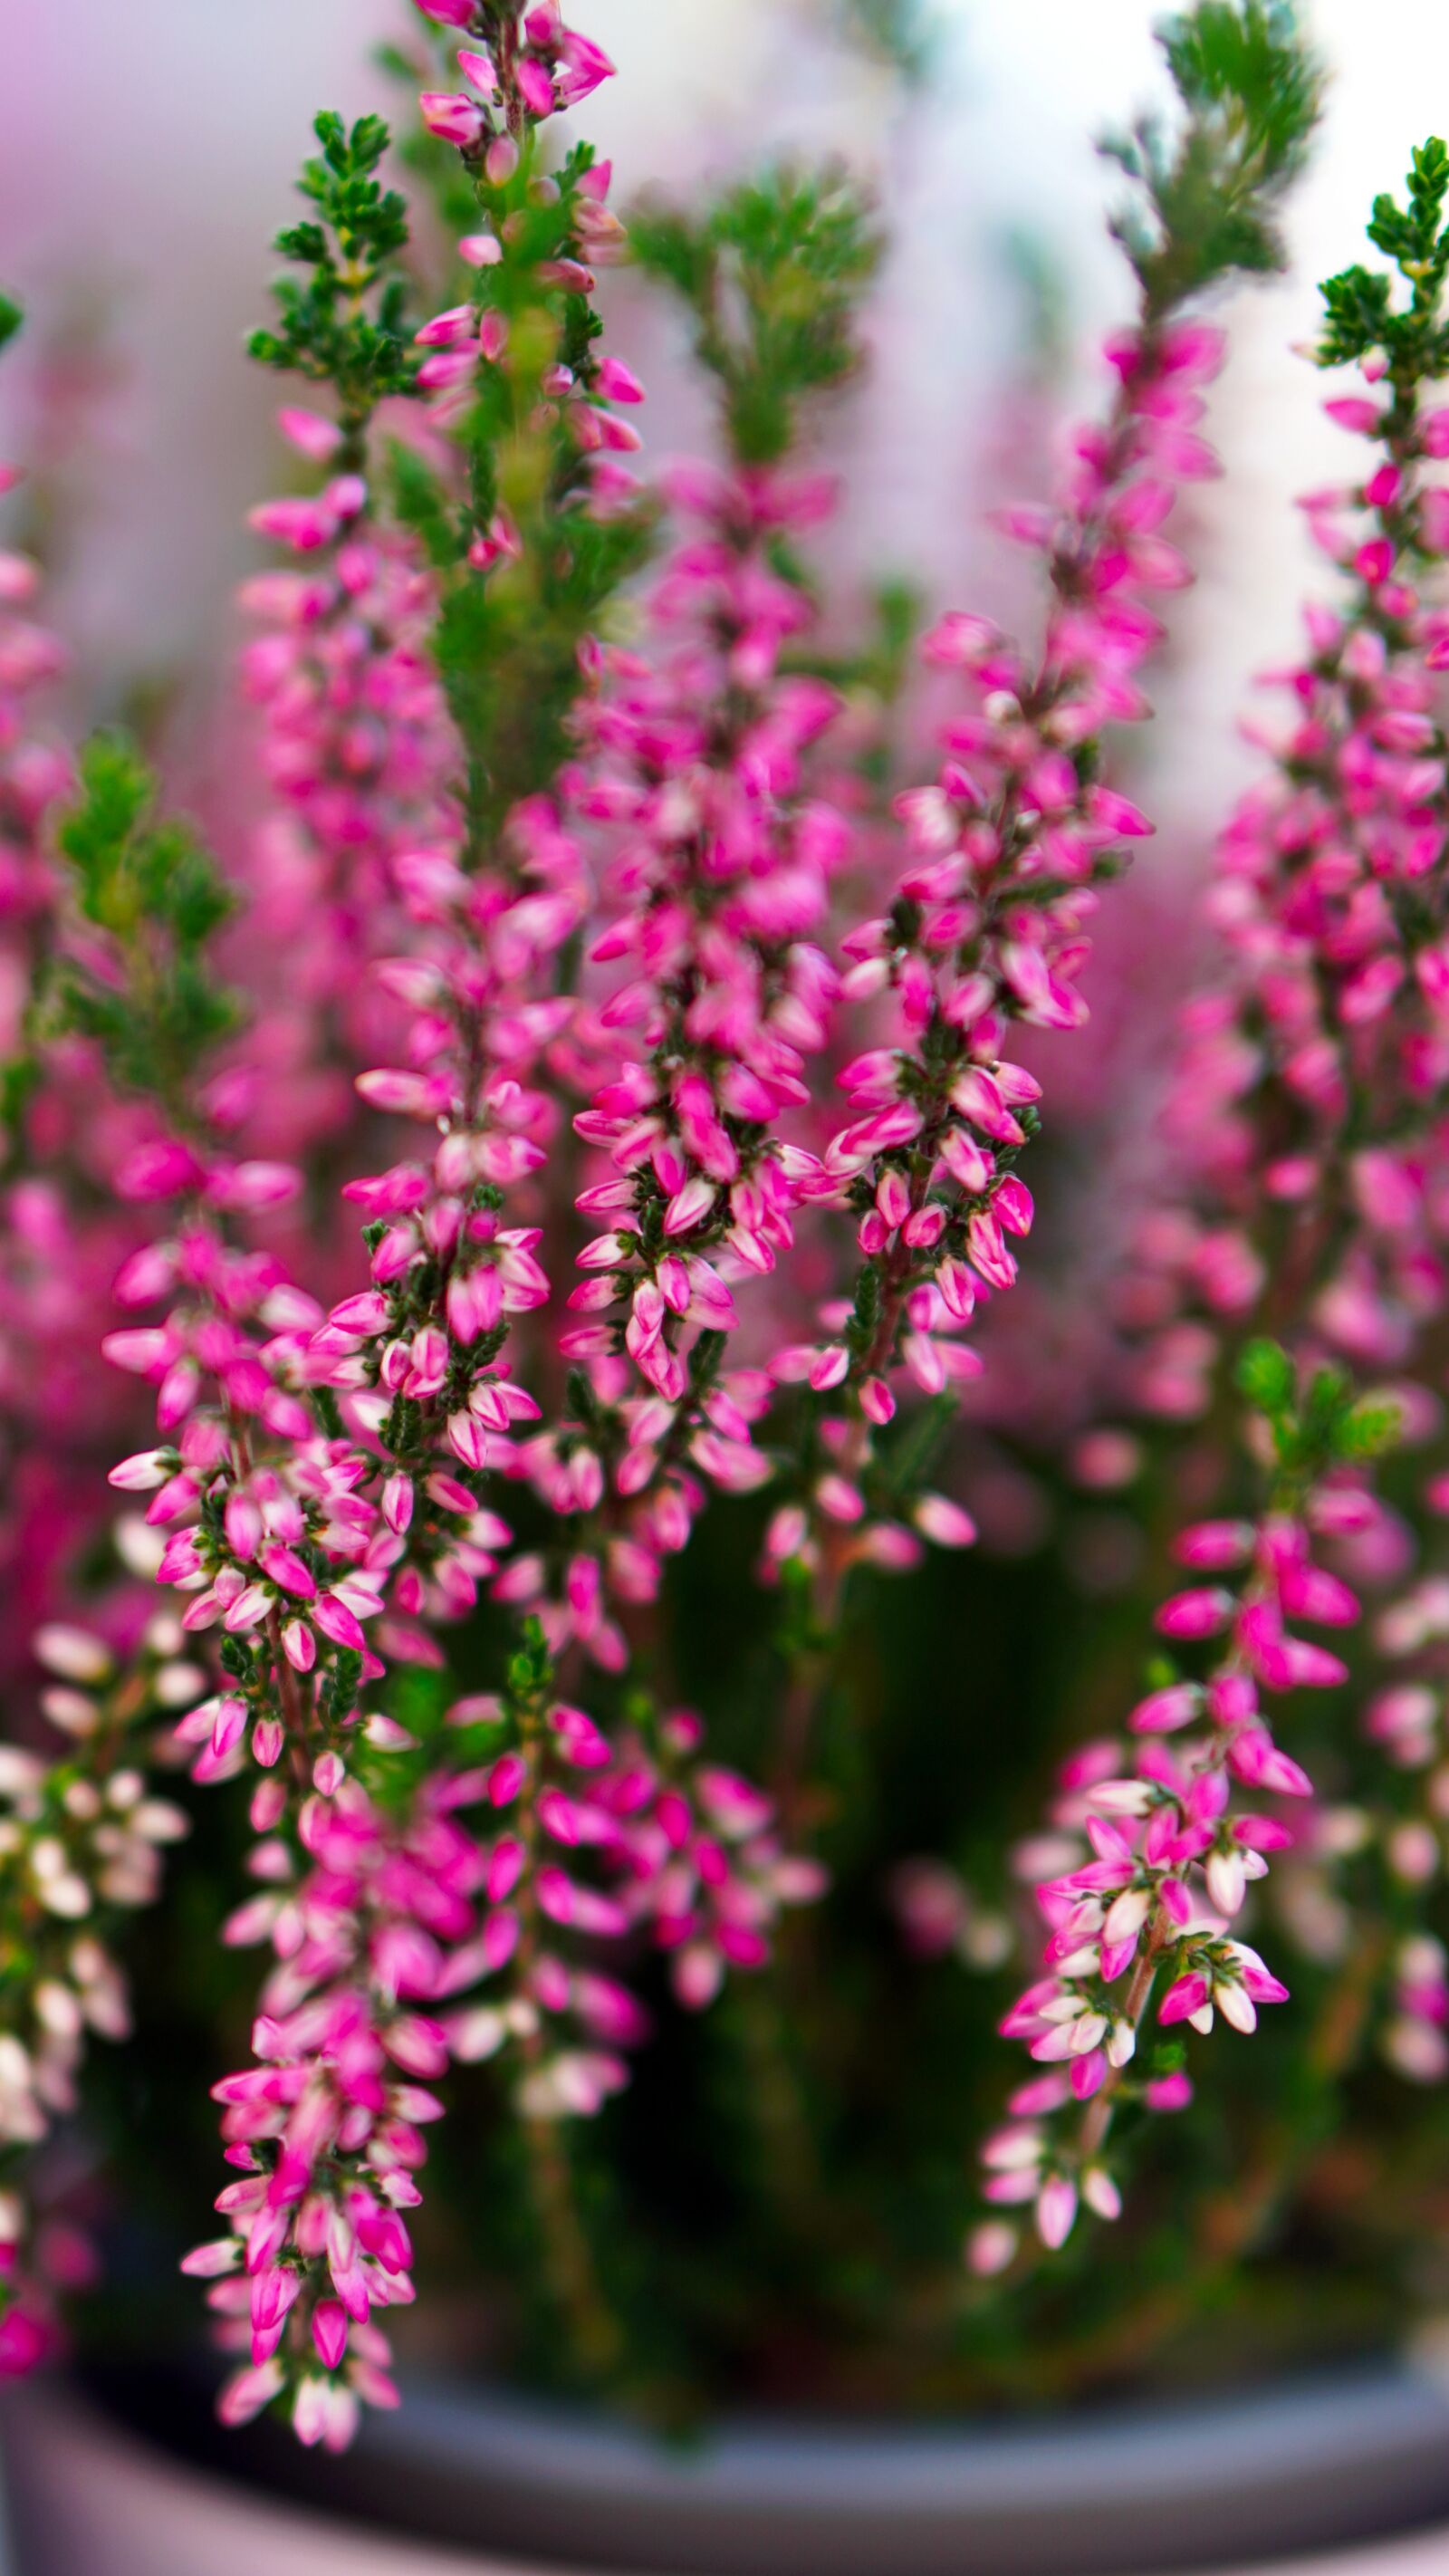 E 50mm F1.8 OSS sample photo. Flowers, heather flowers, bloom photography